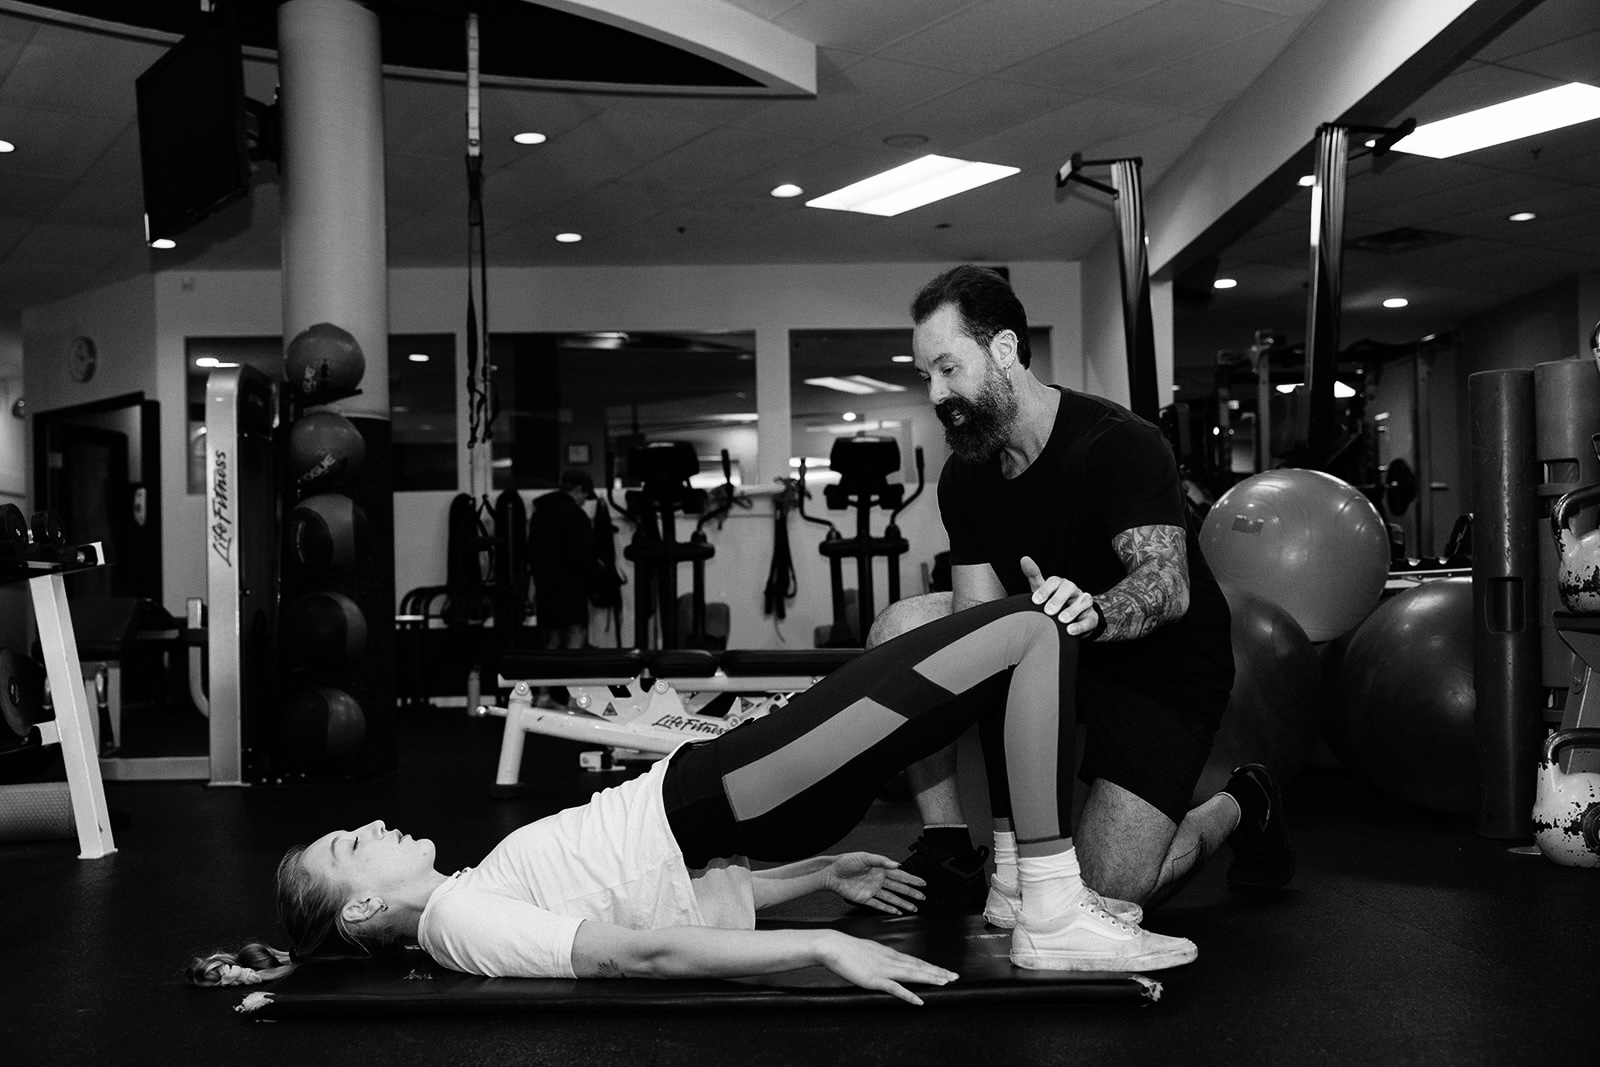 A personal trainer helping a client with a personal training session